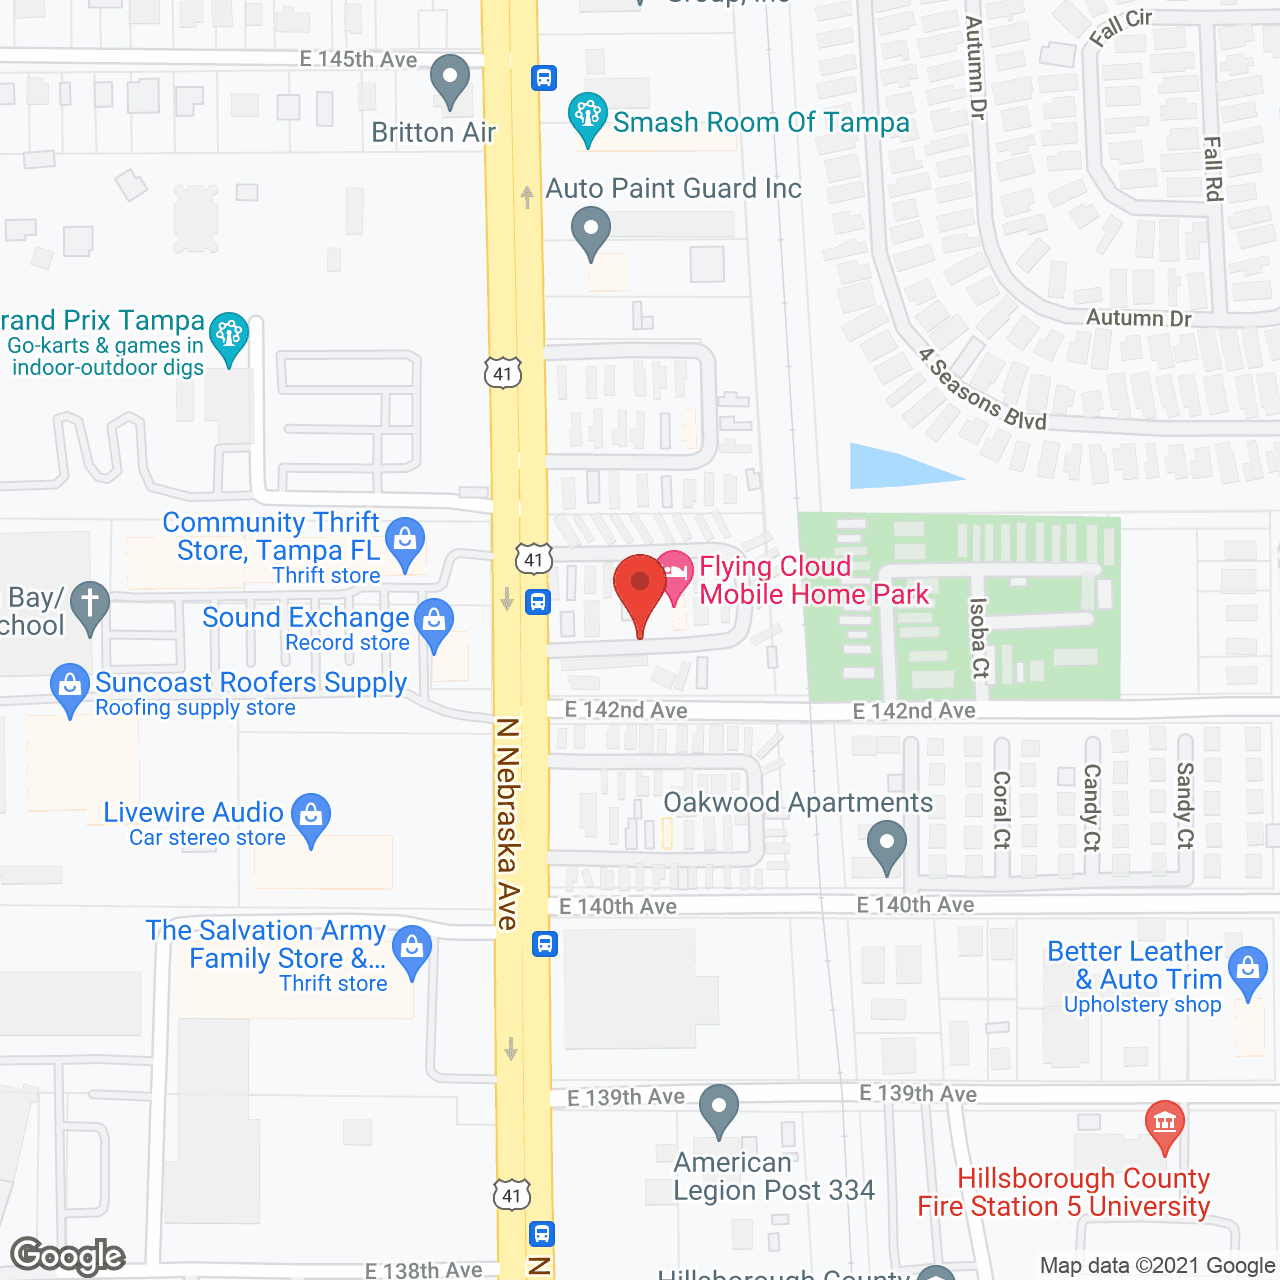 Remedy Care Solution - Tampa, FL in google map